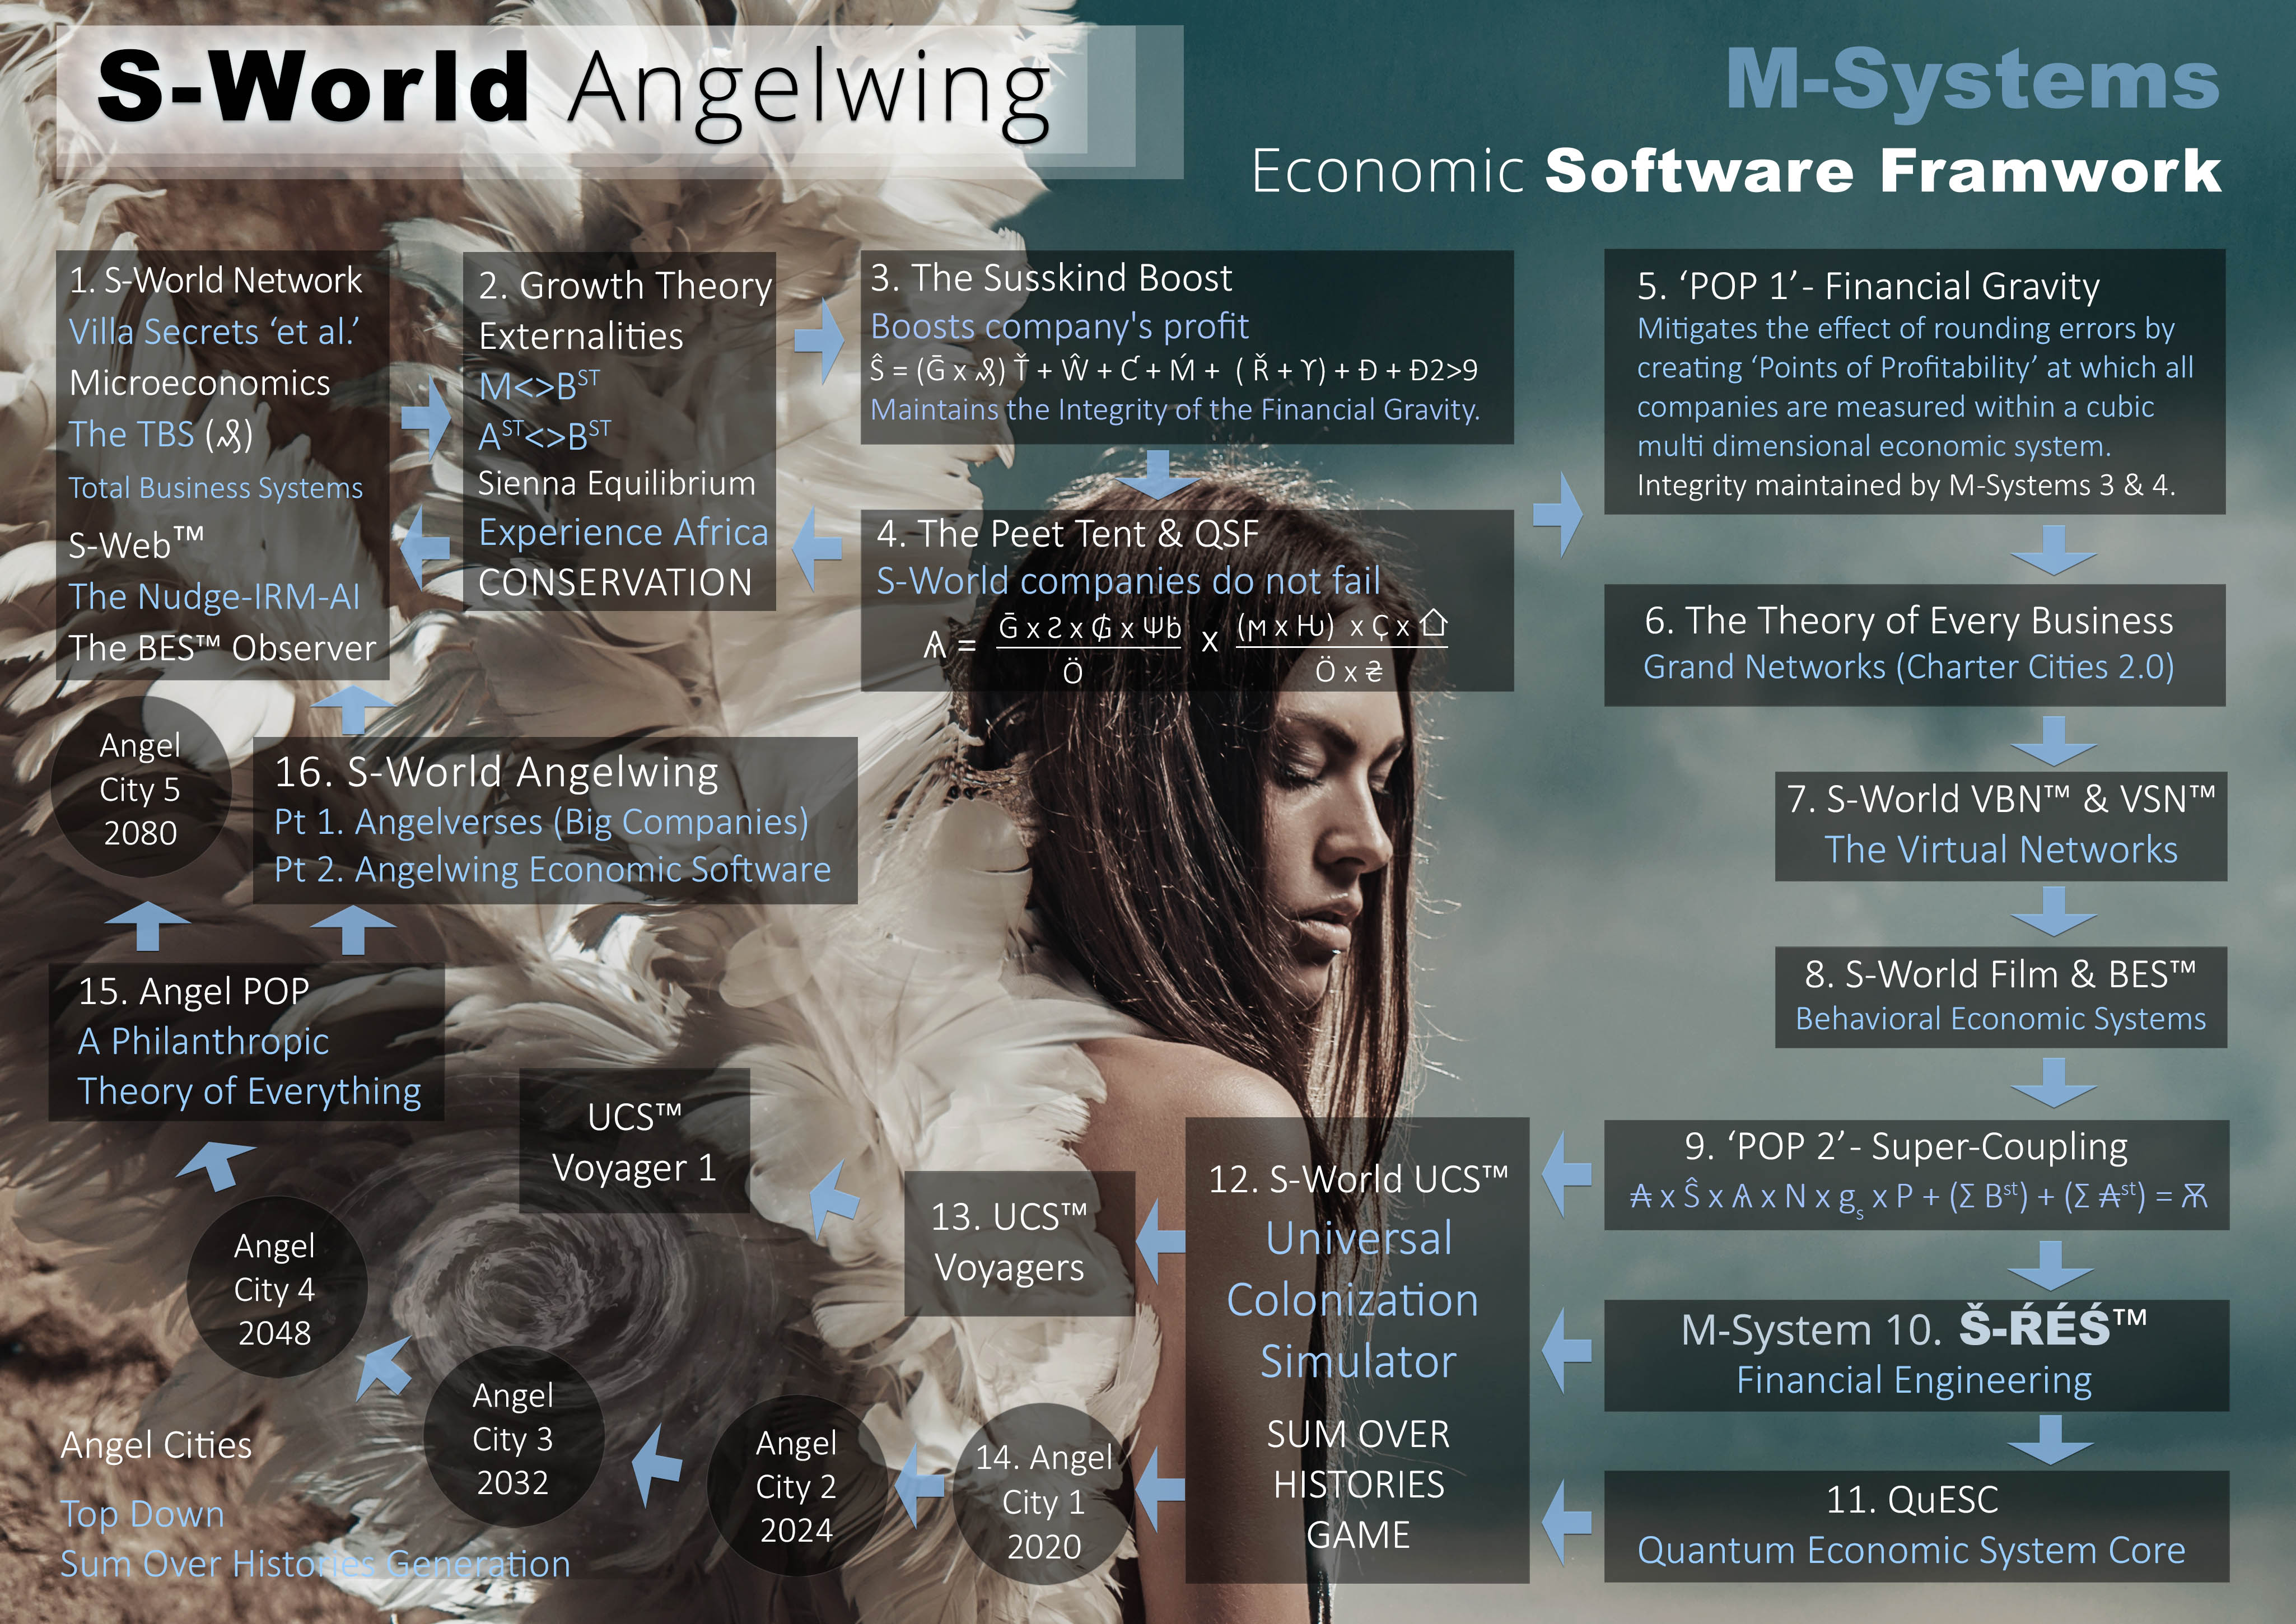 S-World-Angelwing__M-Systems__Economic-Software-Framework__Angelwing-Background